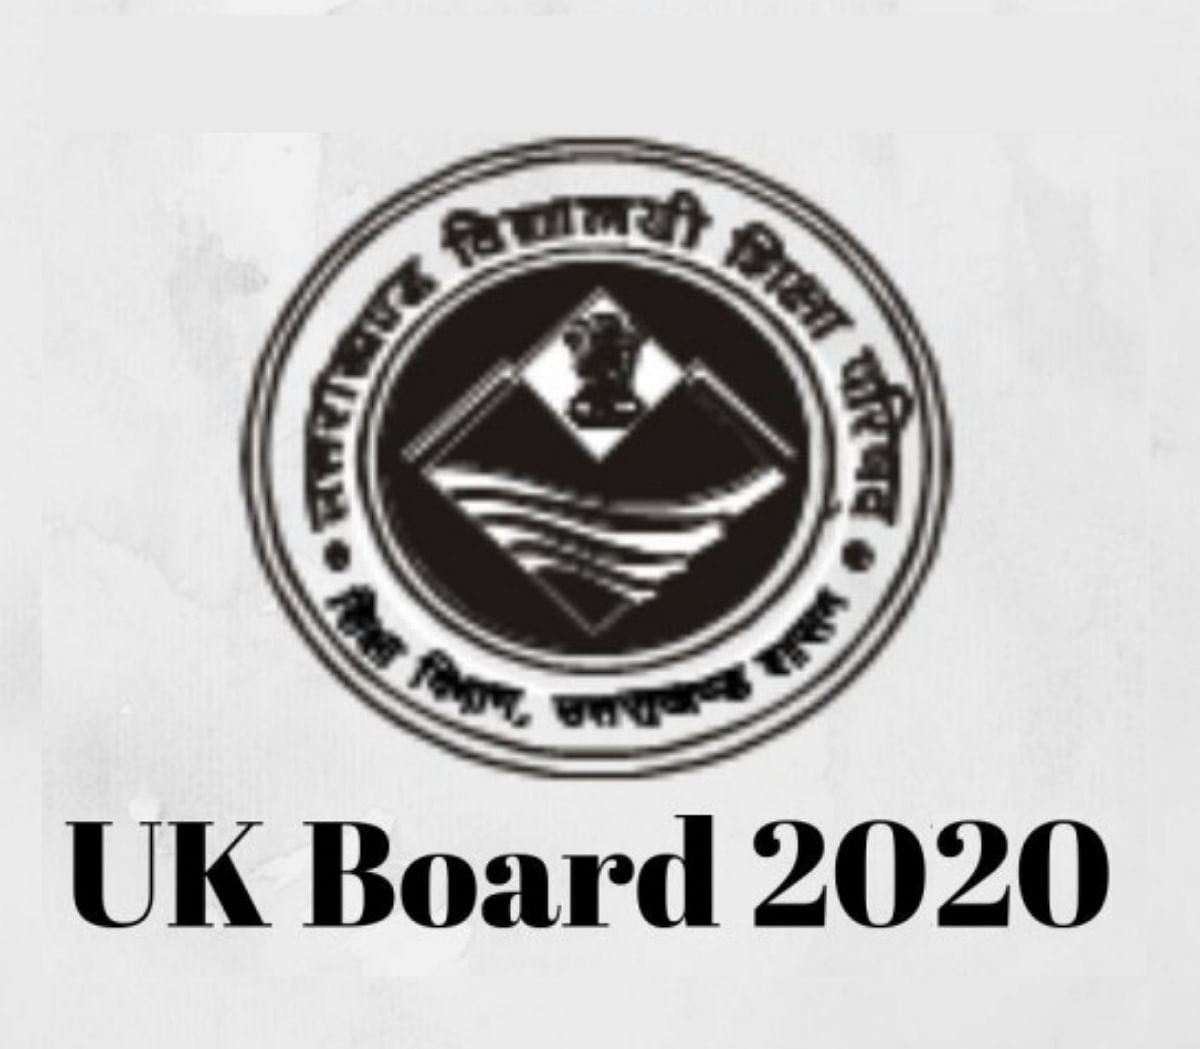 Uttarakhand Board 2020: Remaining Exams for Class 10, 12 to Begin From June 20